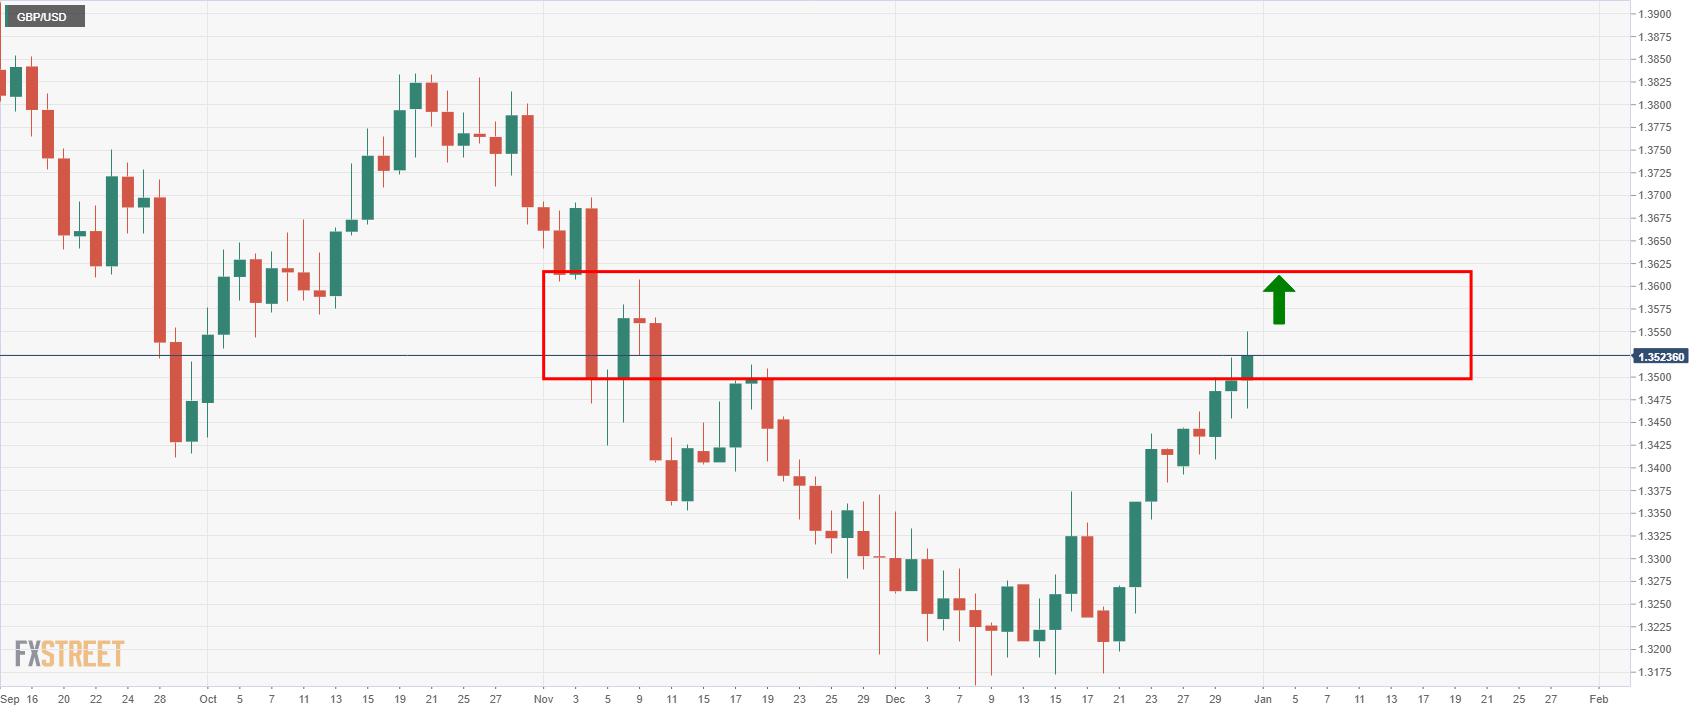 GBP/USD Price Analysis: Bulls looking for a fresh corrective high into the 1.36s